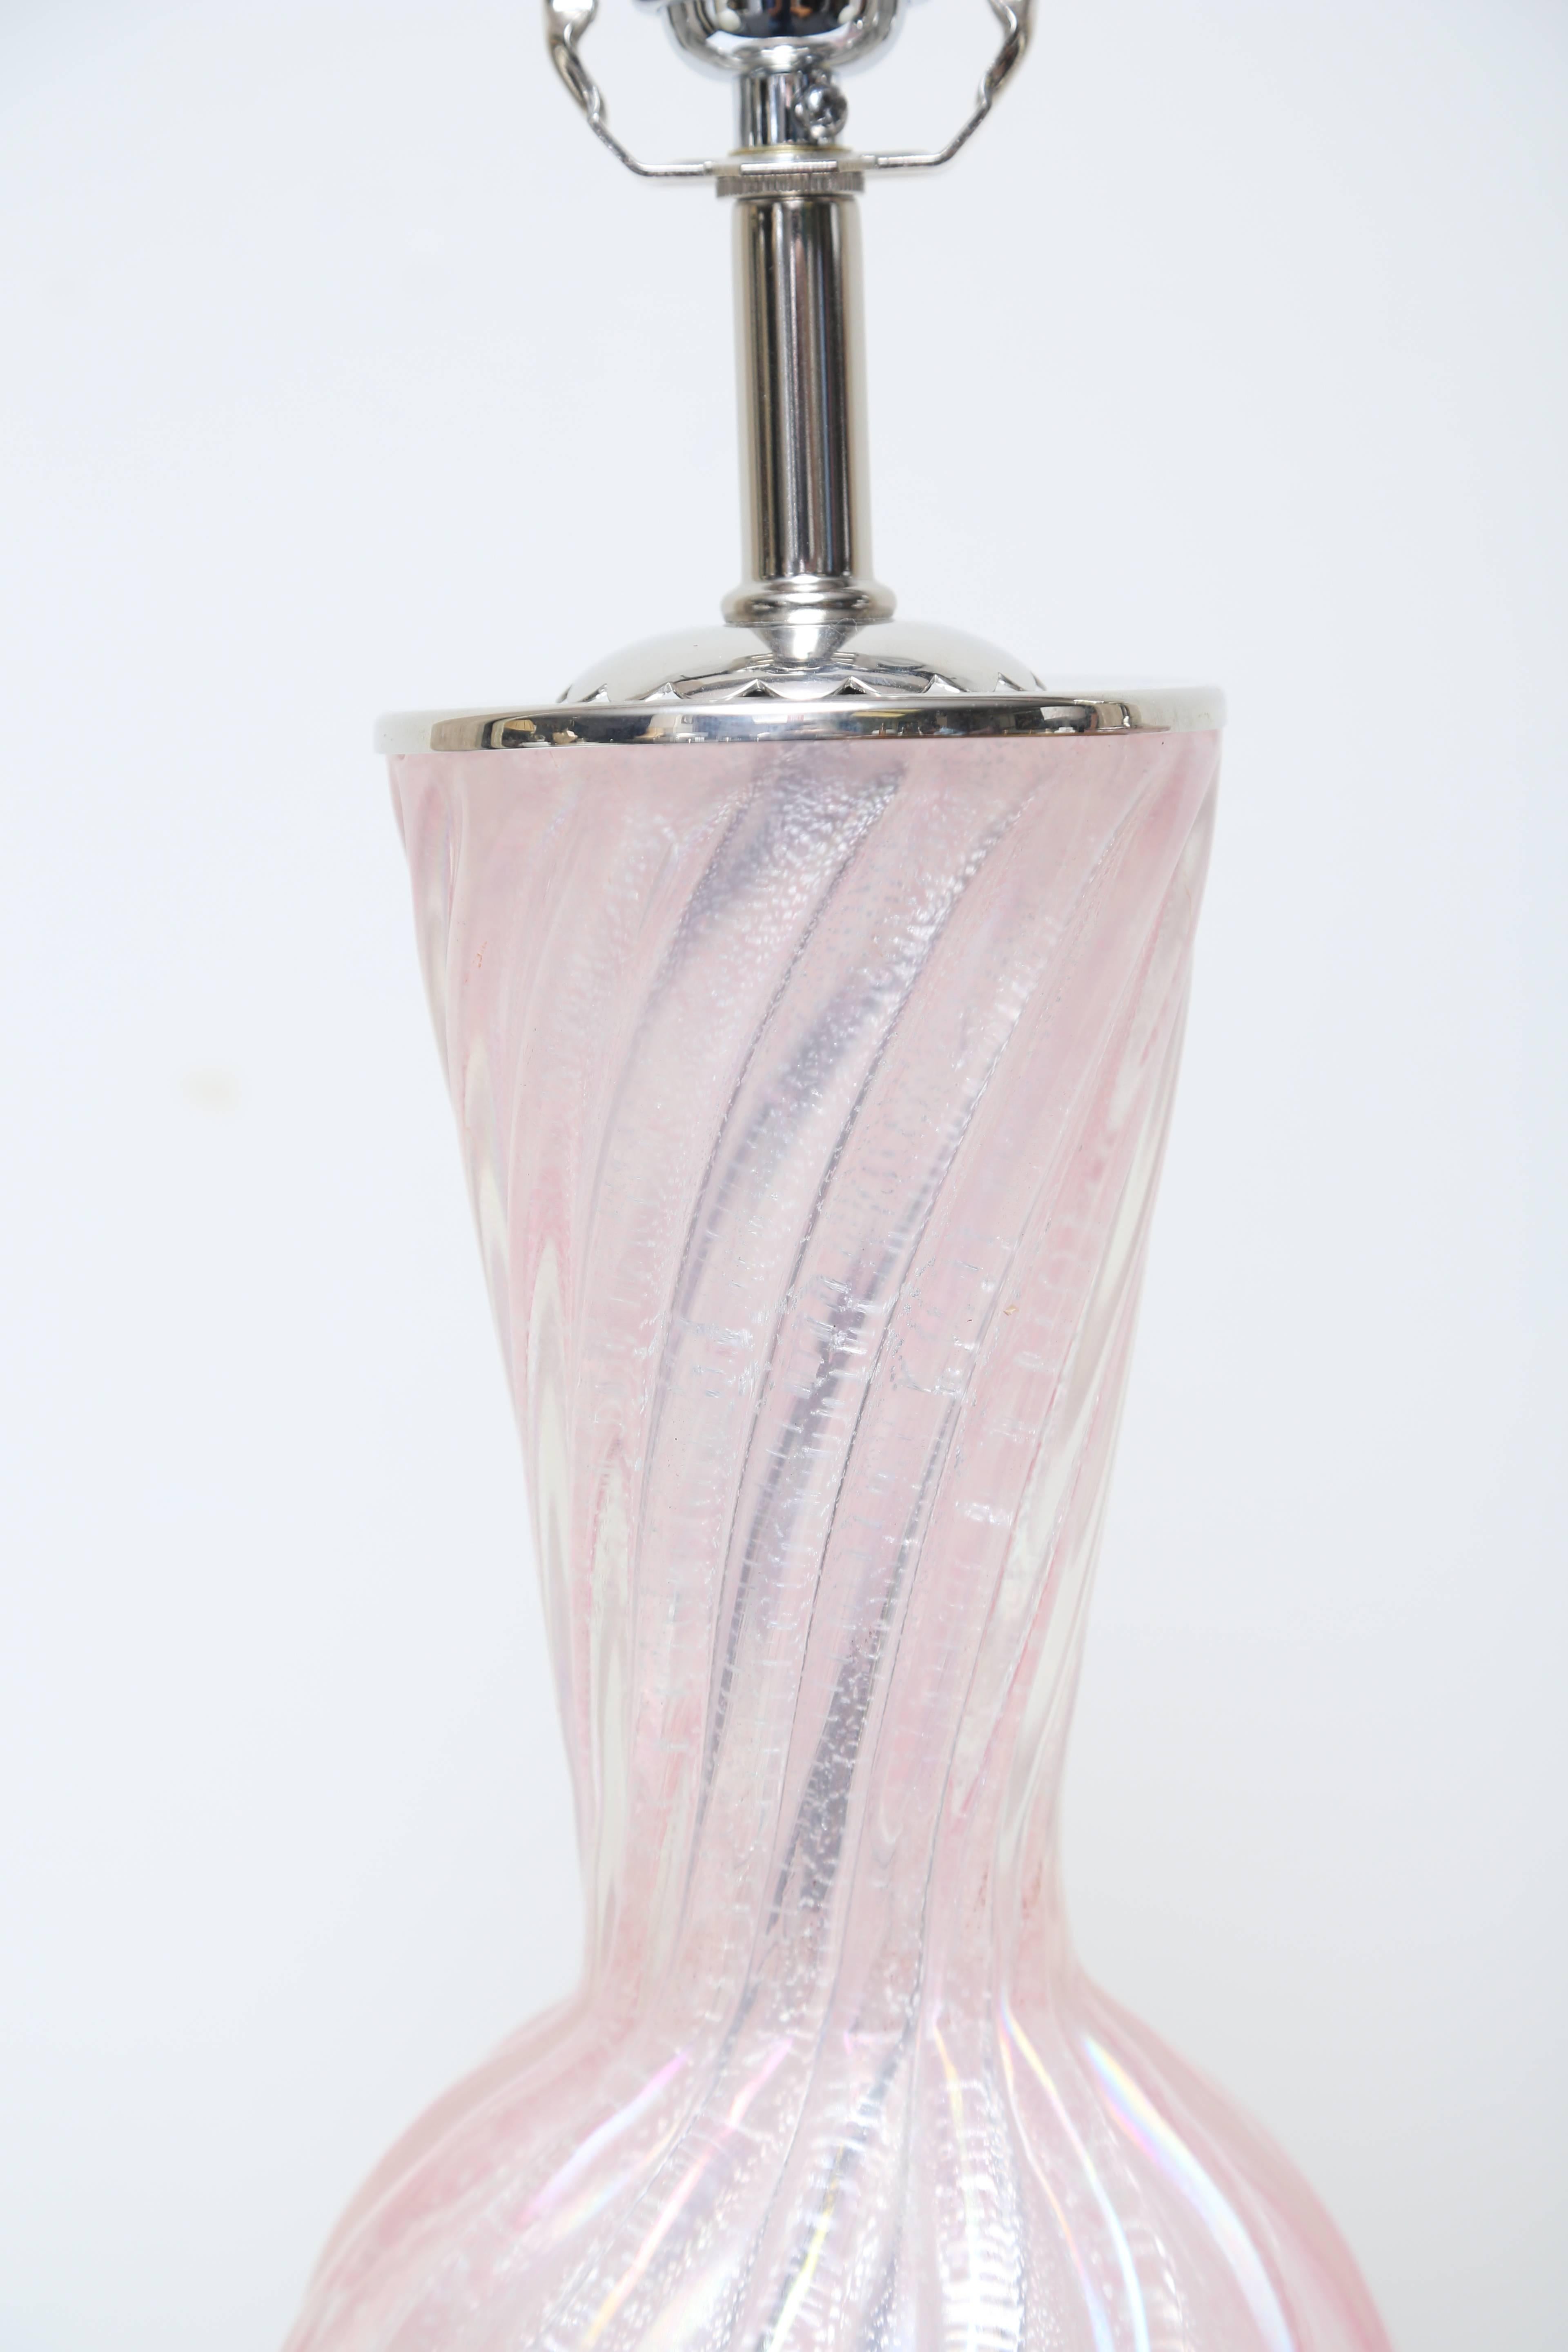 Pink with silver-mounted on Lucite bases with new wiring, circa 1955.